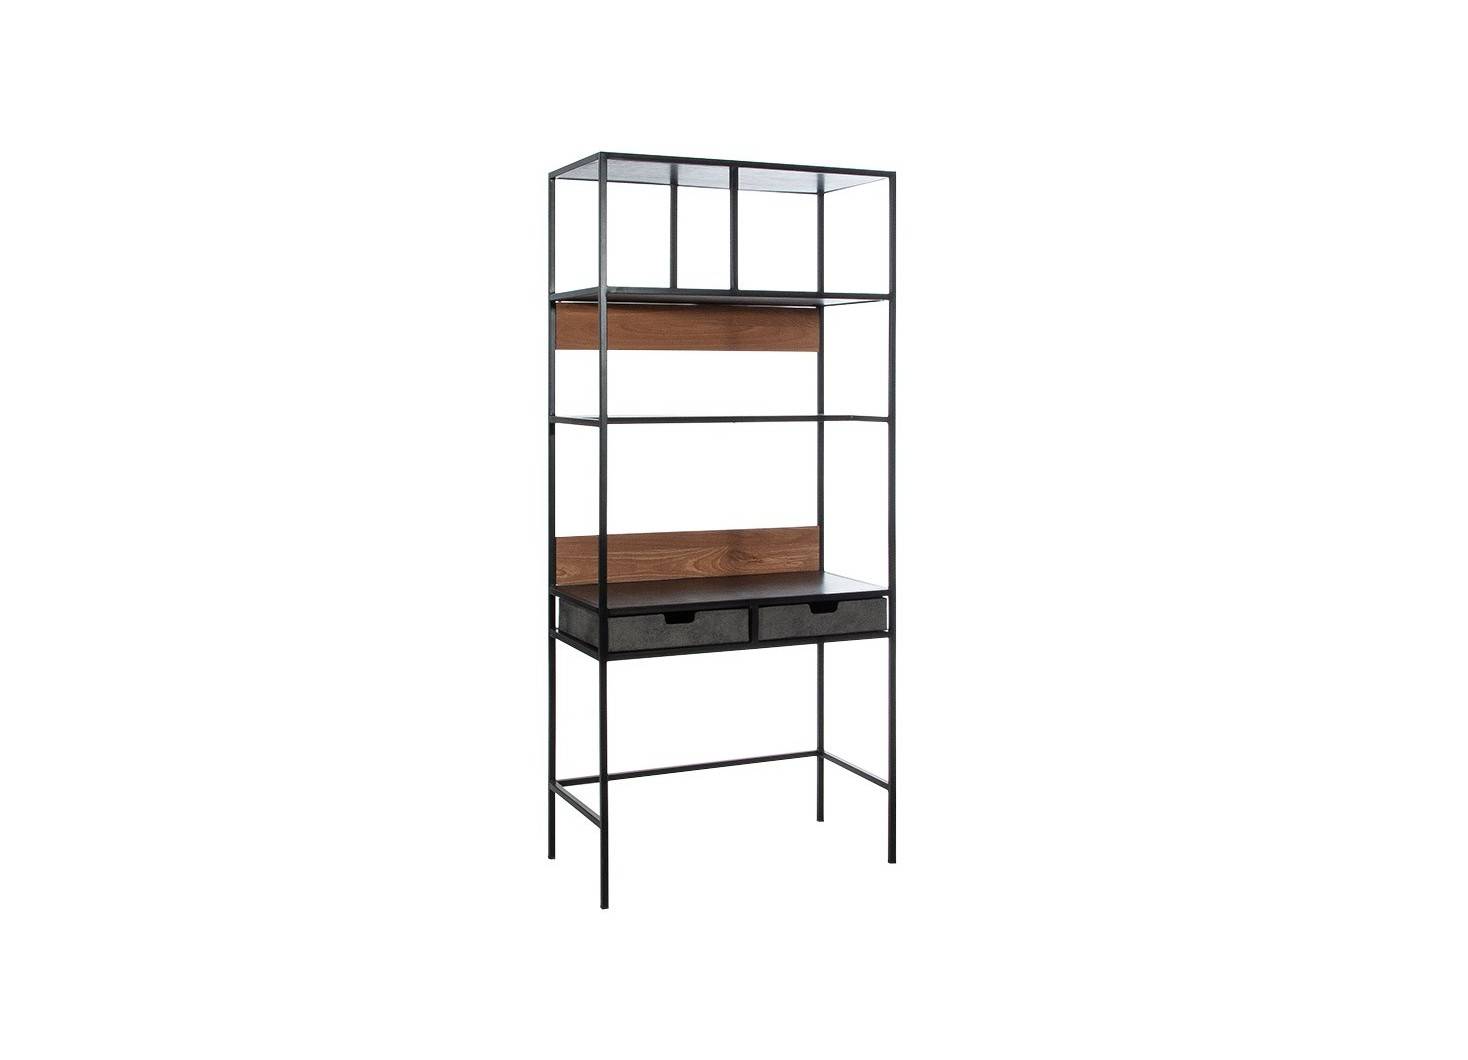 Combo shelving unit with desk